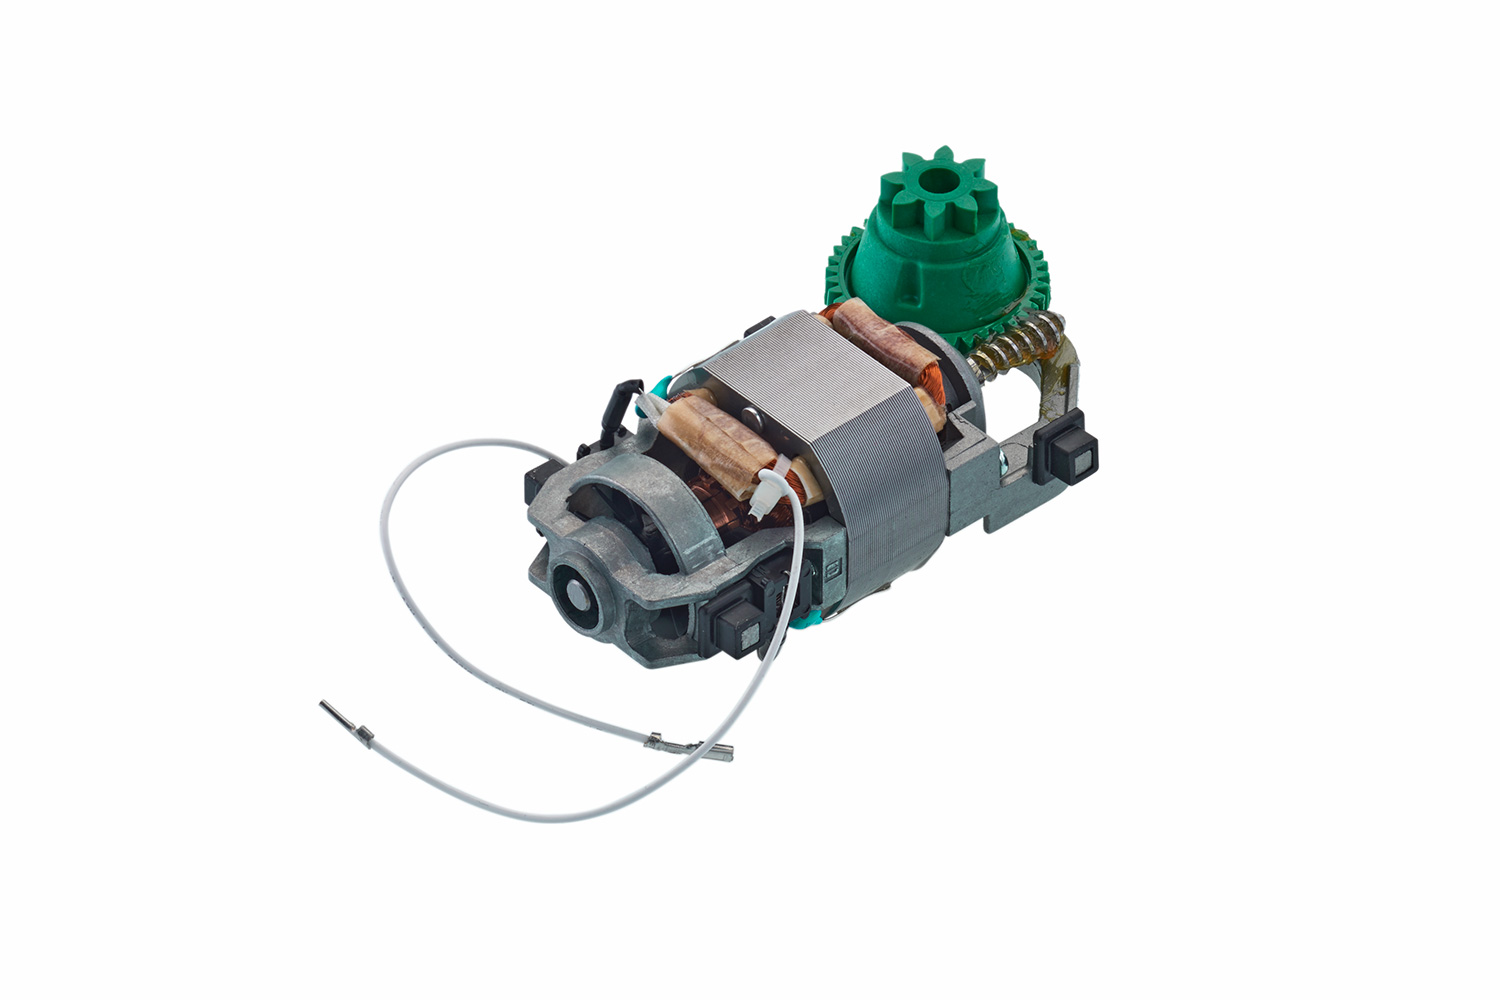 Motor with a green gear (right-handed operated)